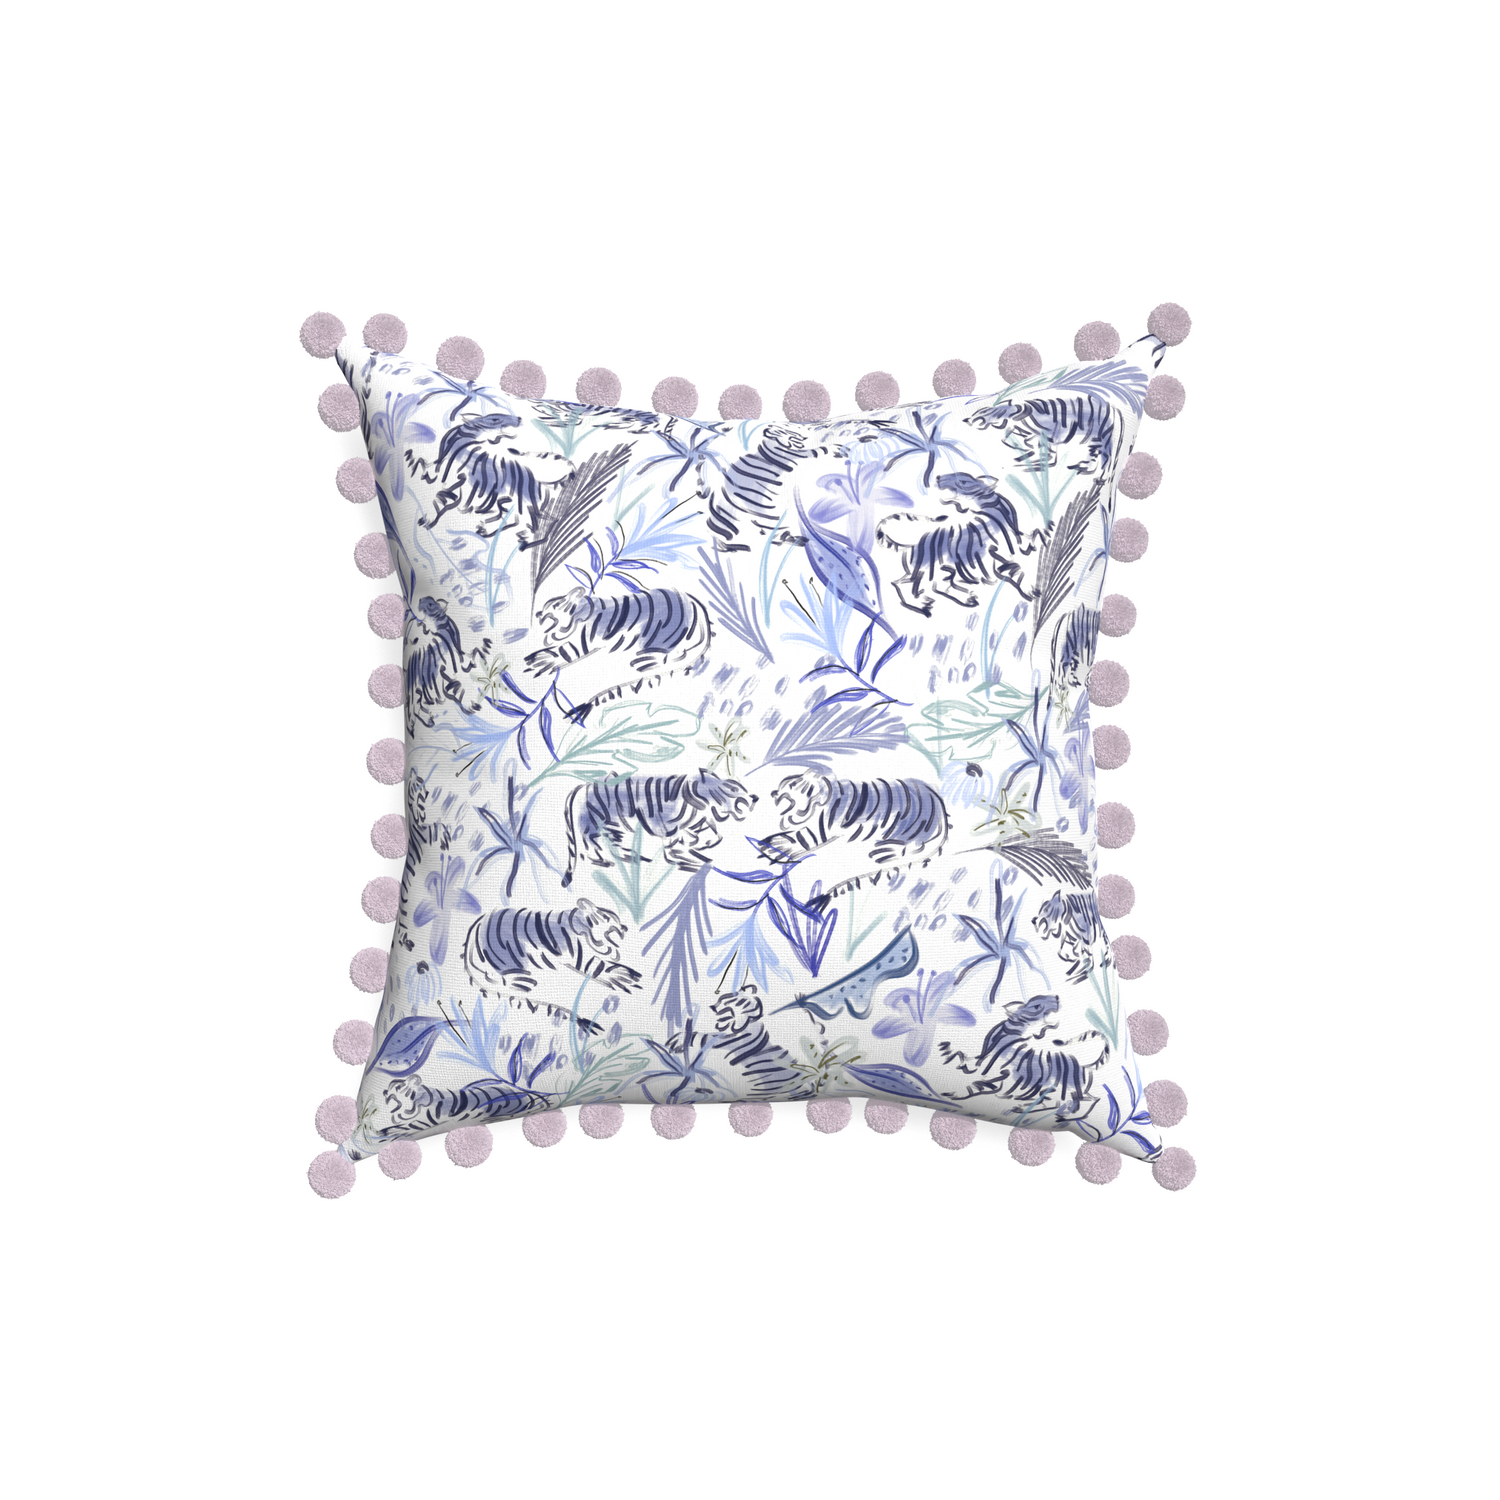 18-square frida blue custom blue with intricate tiger designpillow with l on white background